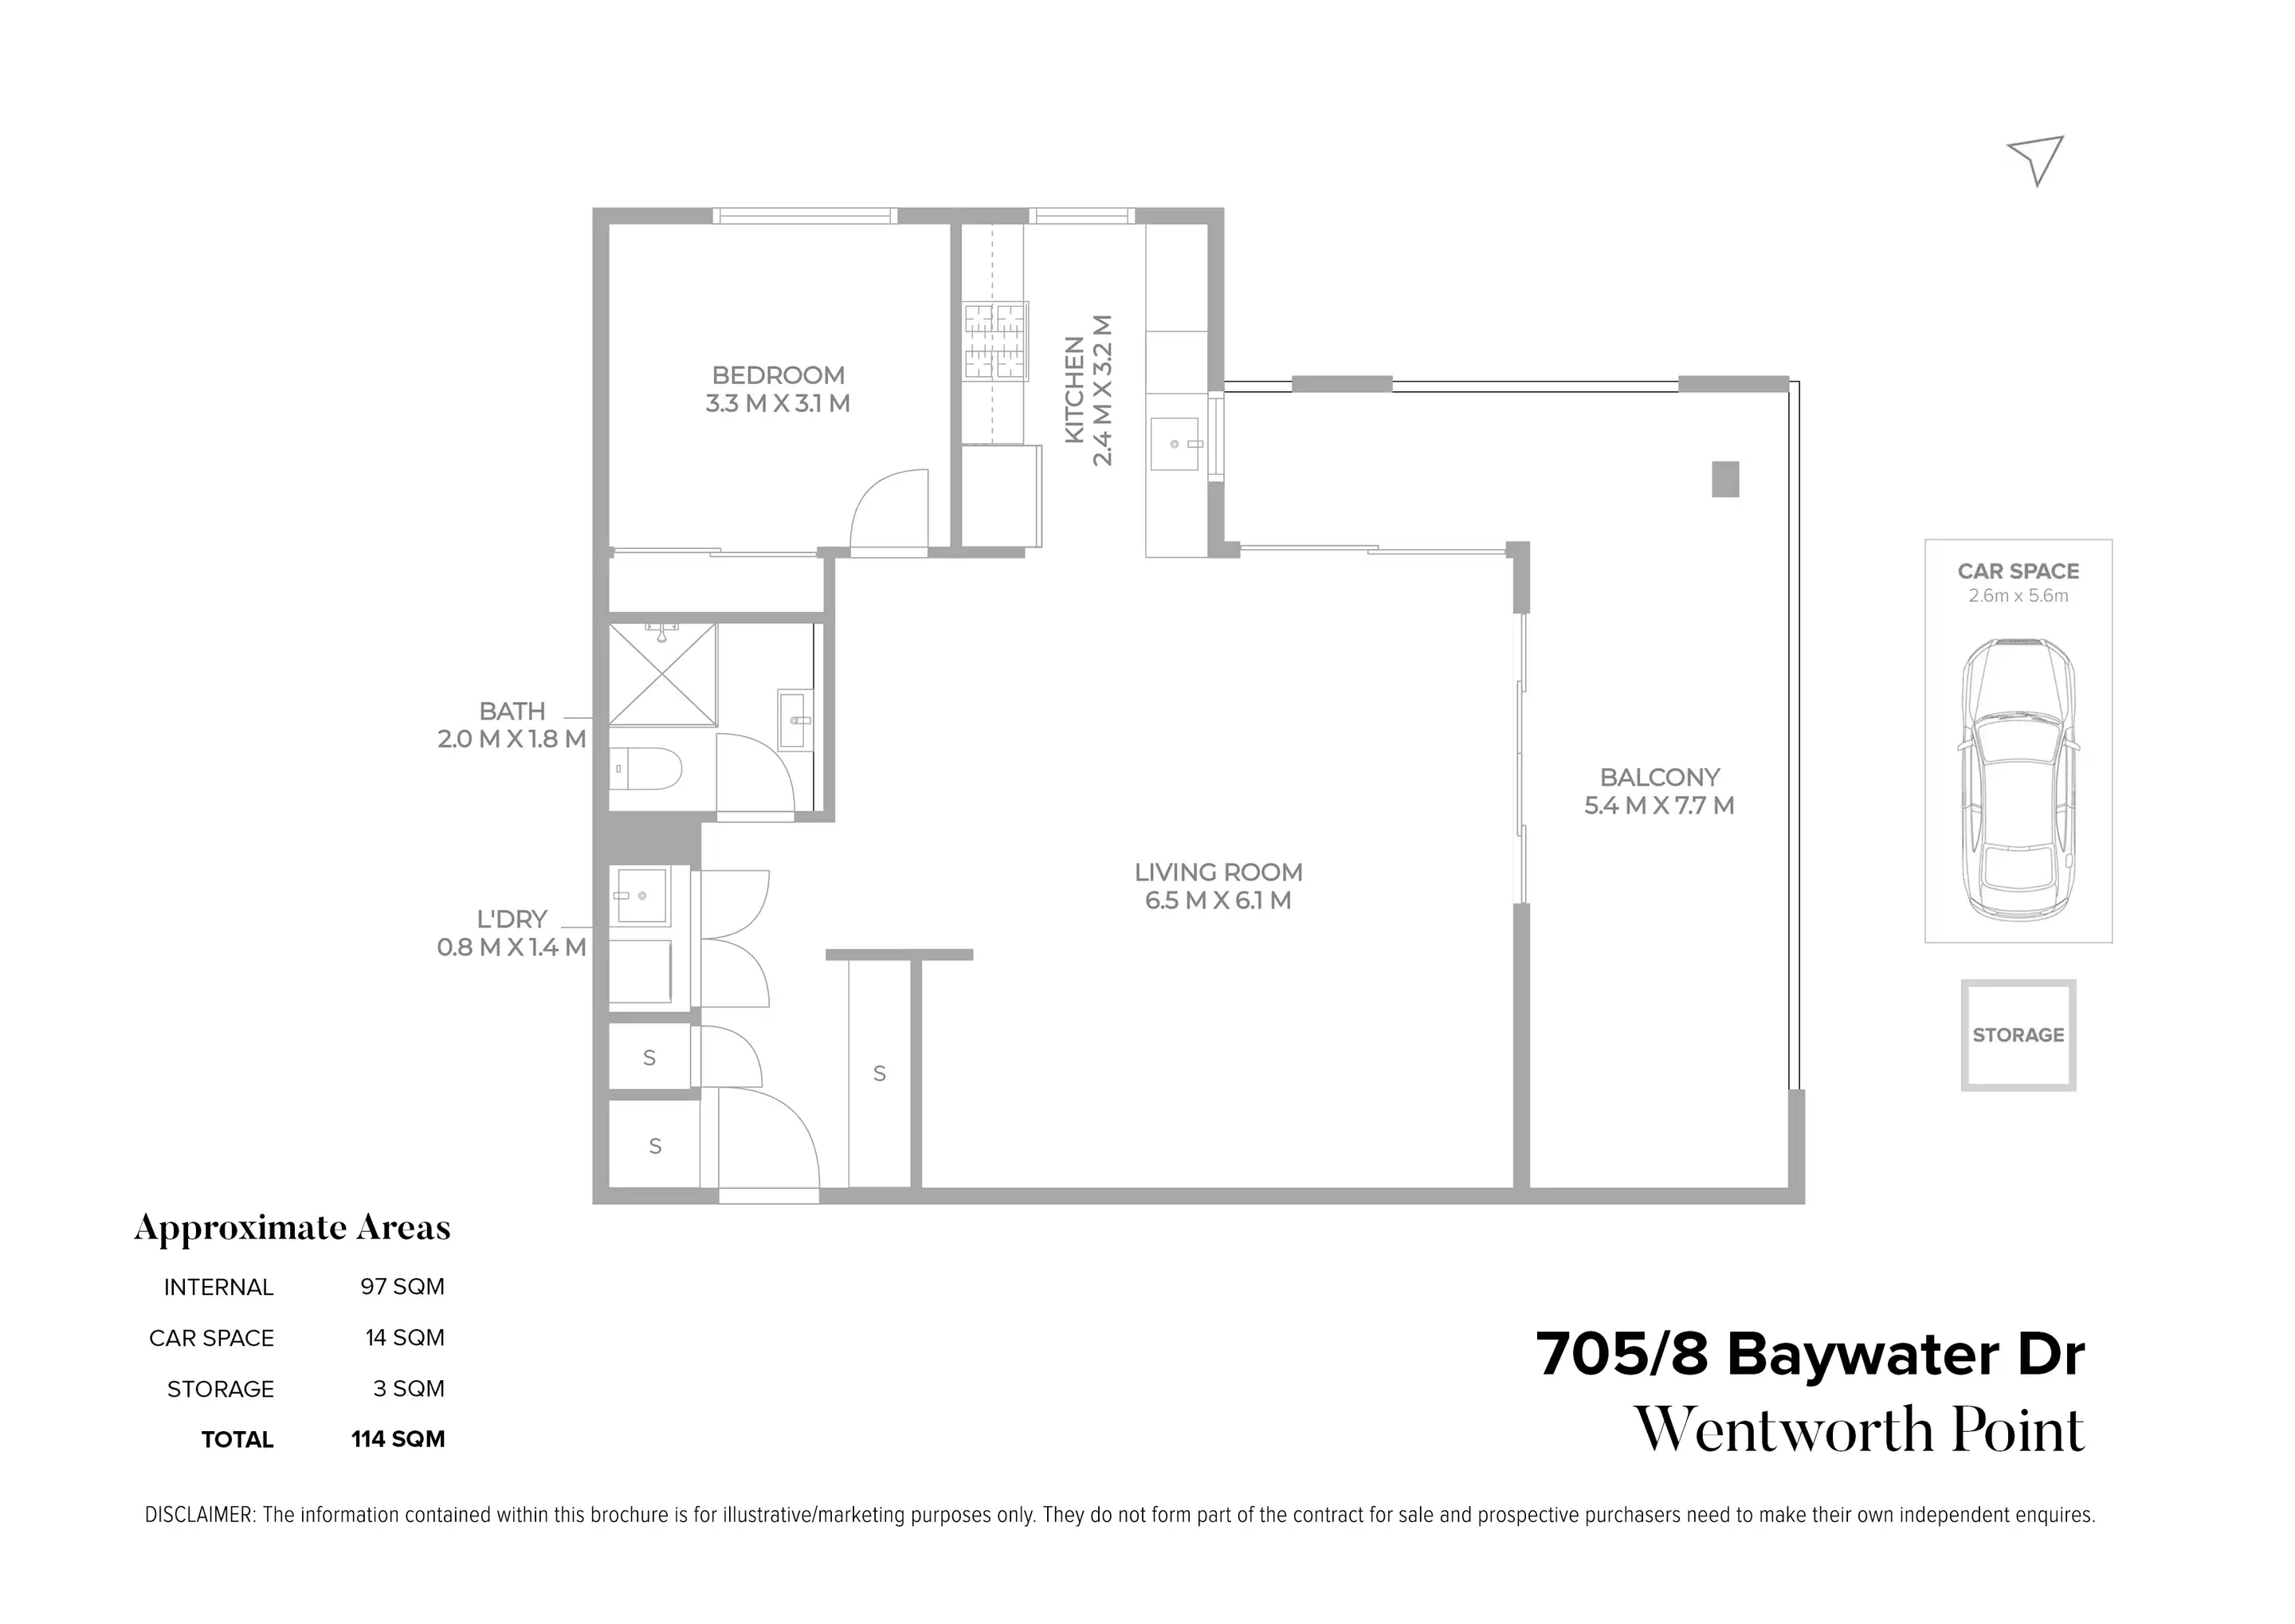 705/8 Baywater Drive, Wentworth Point Sold by Chidiac Realty - floorplan